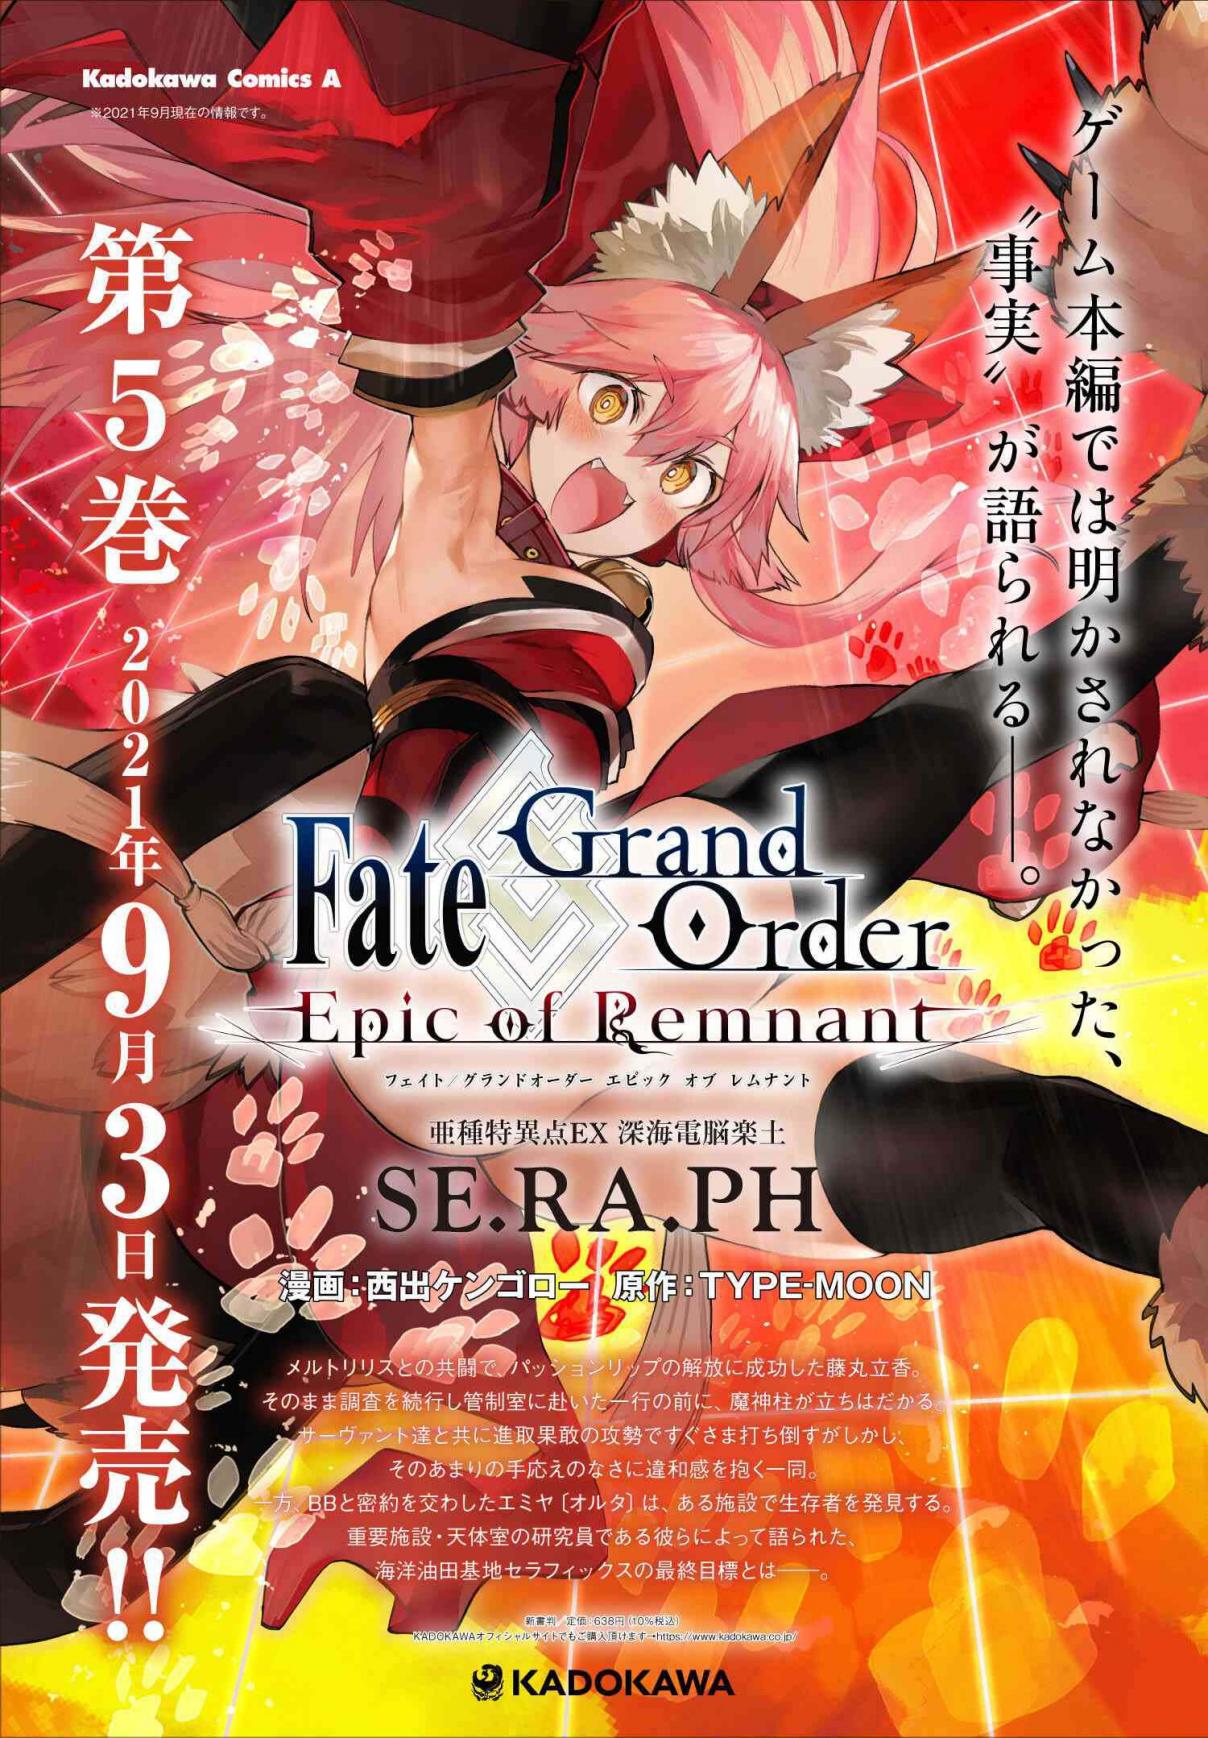 Fate/Grand Order: Epic of Remnant - Deep Sea Cyber-Paradise SE.RA.PH 27.3